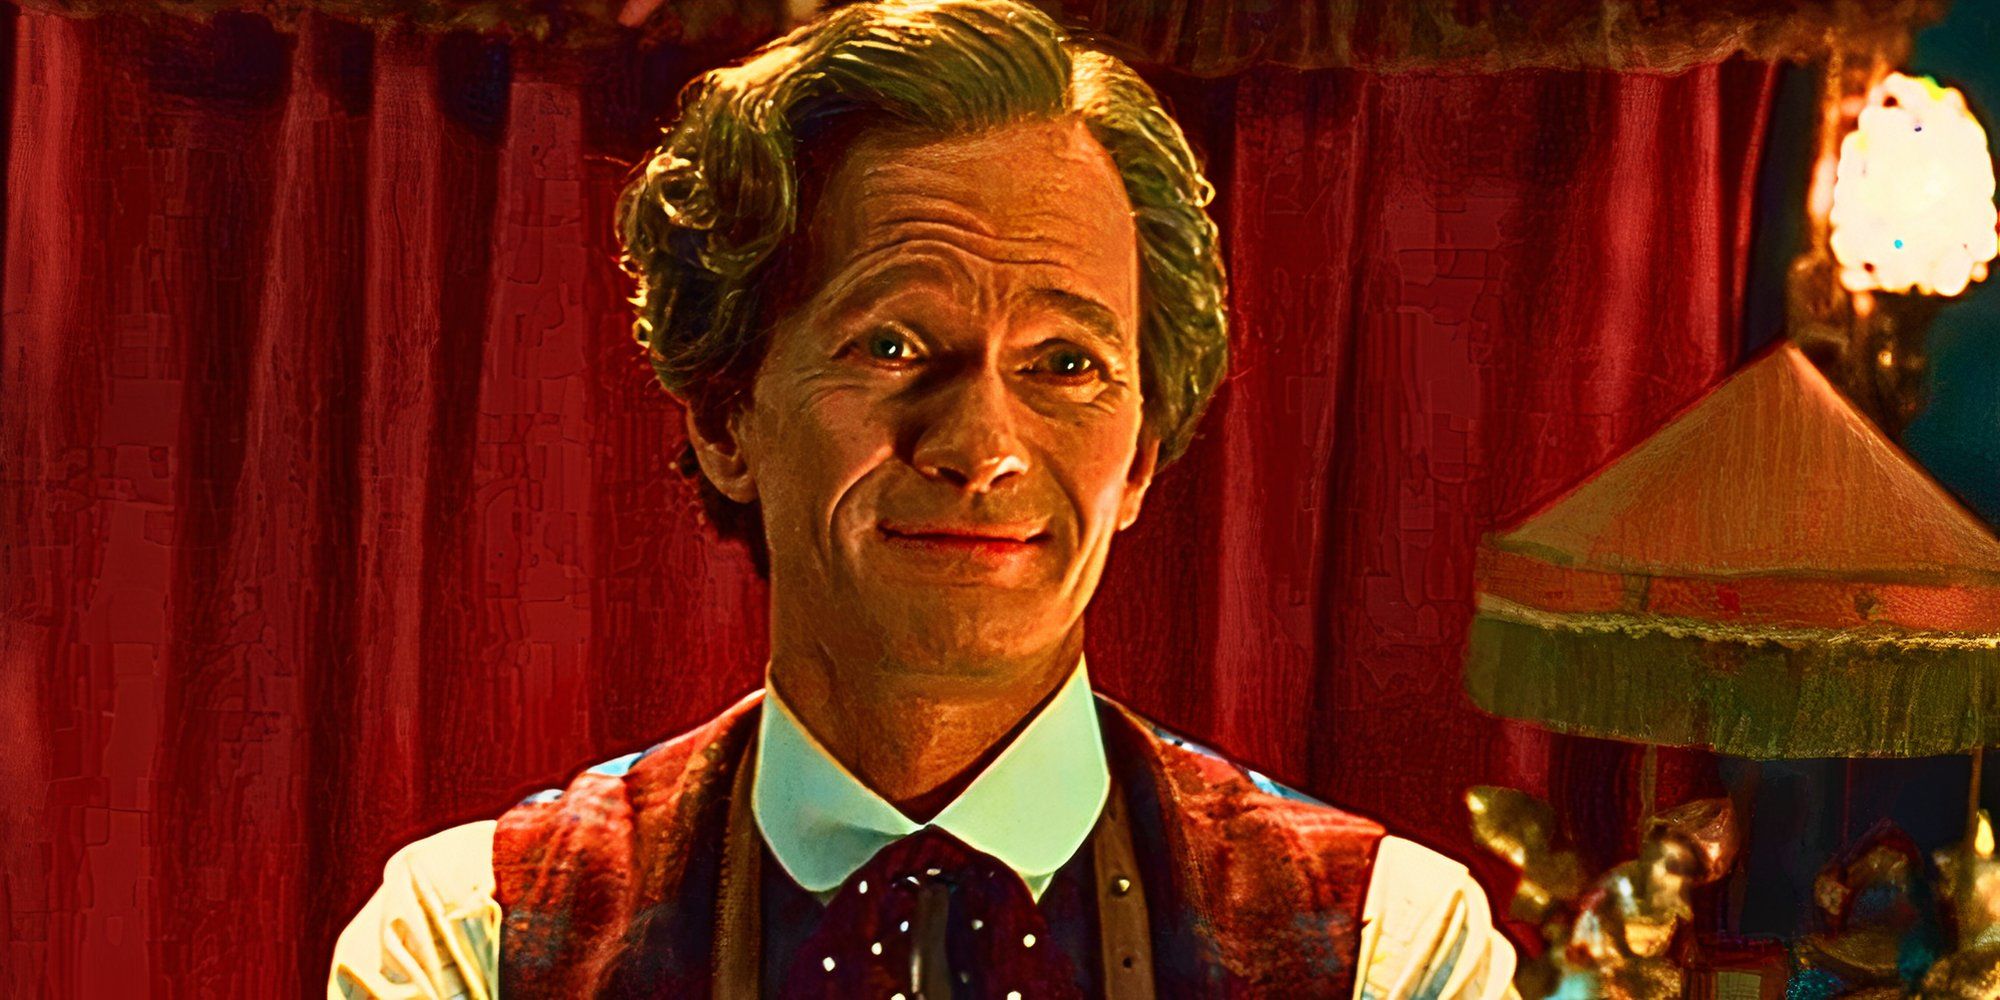 Neil Patrick Harris smiling smugly as the Toymaker in Doctor Who